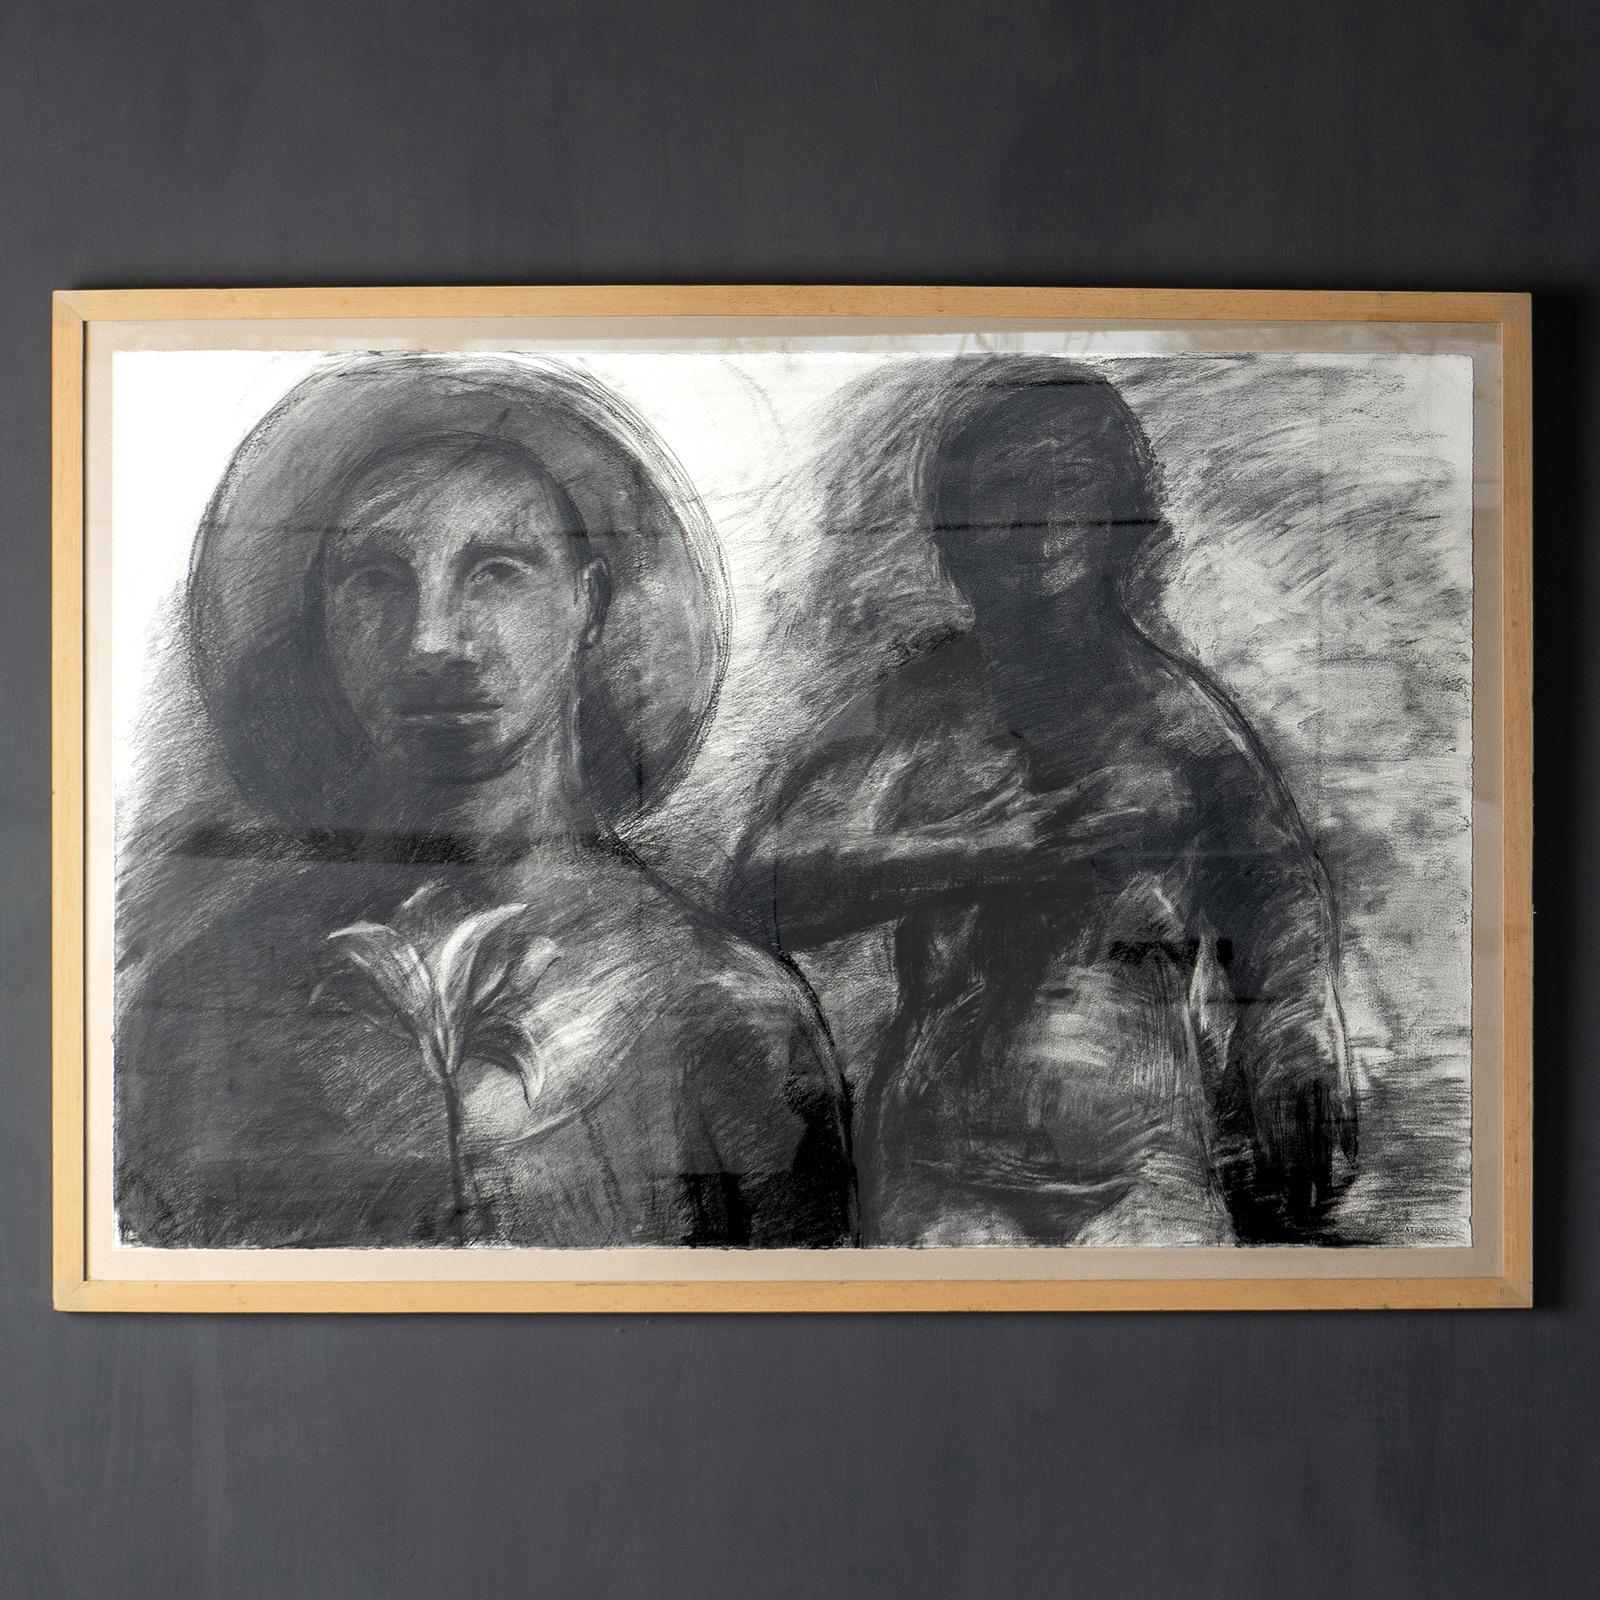 Paper Large Vintage Original Monochrome Charcoal Drawing of Two Figures For Sale